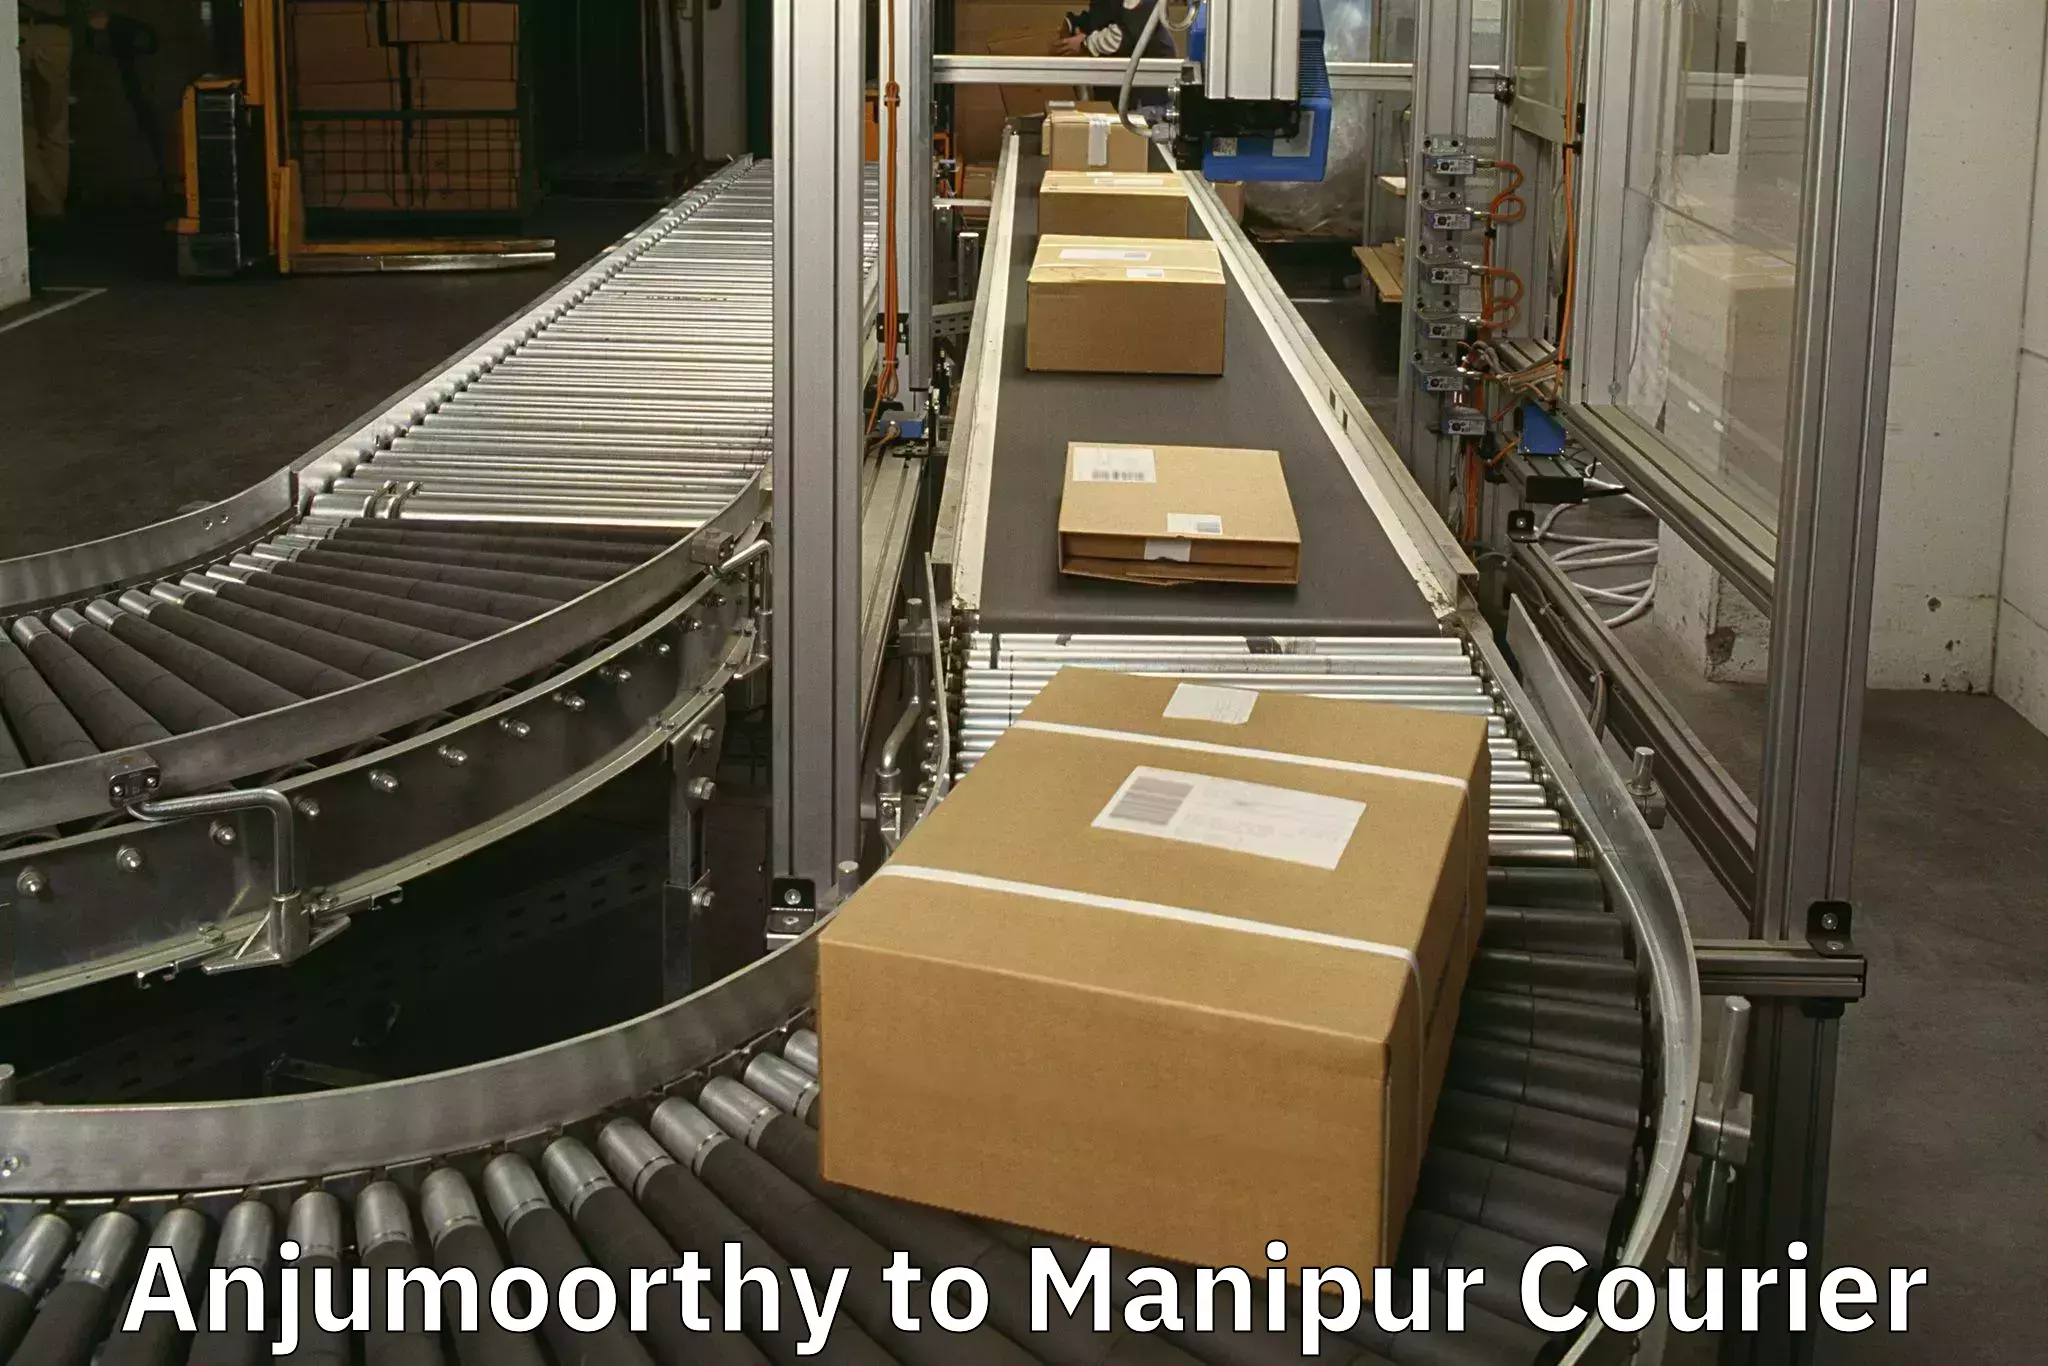 Baggage relocation service Anjumoorthy to Manipur